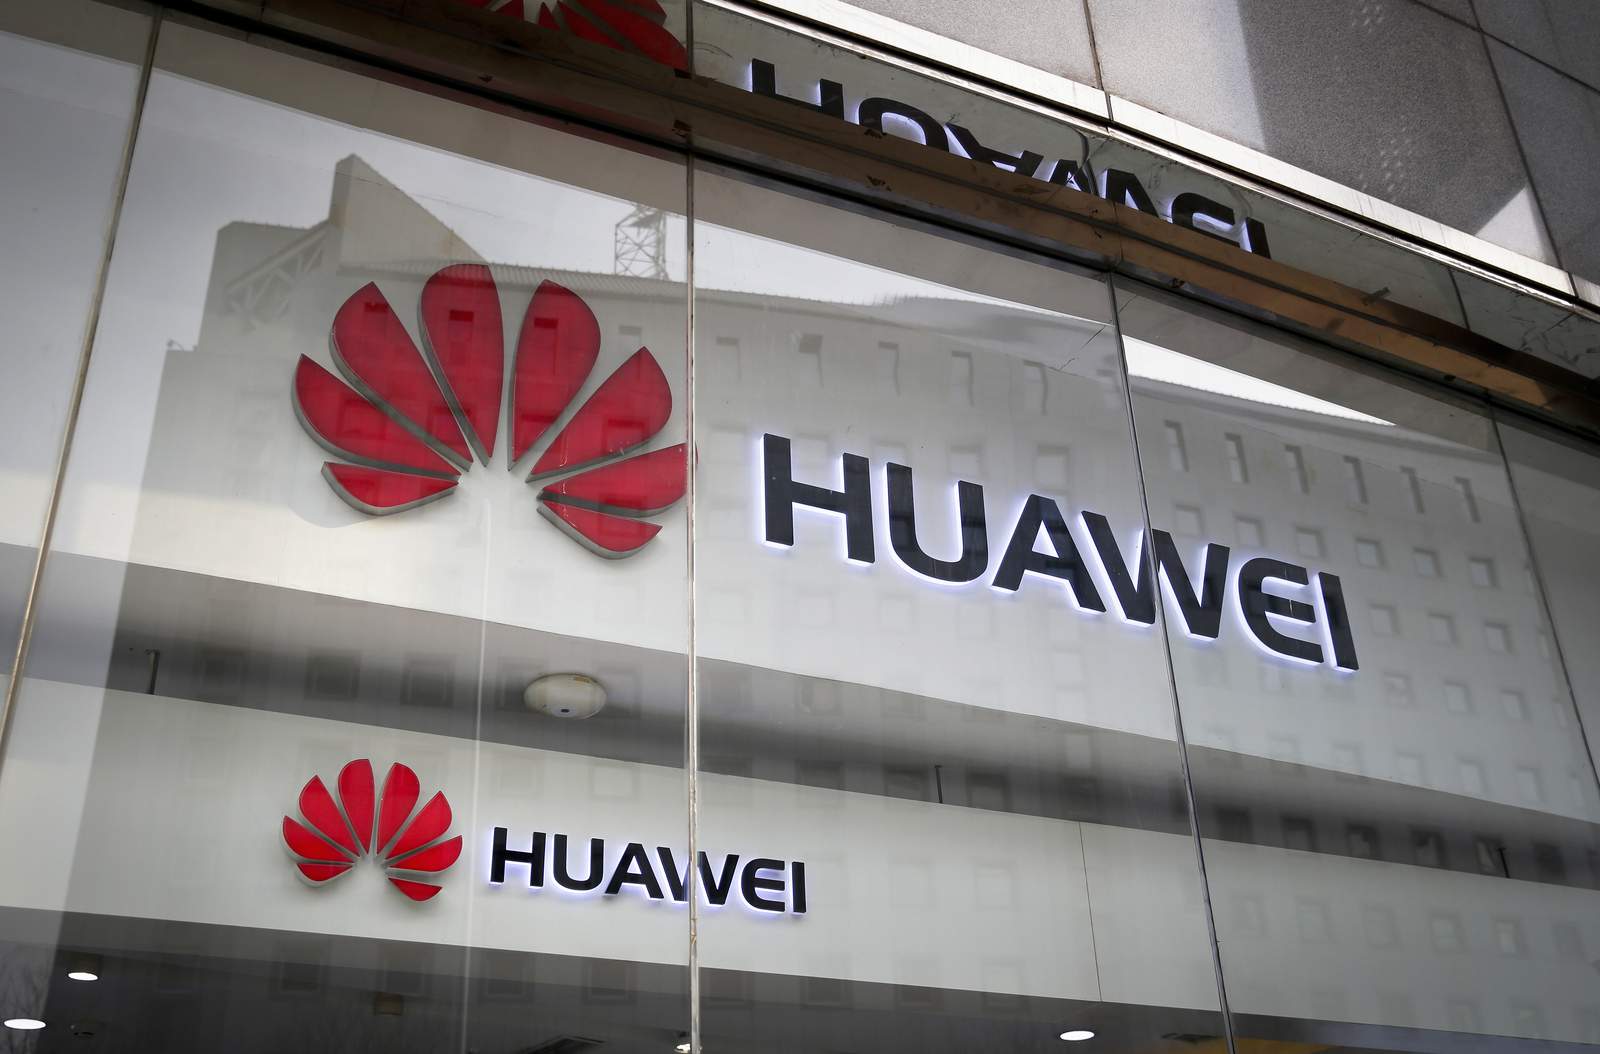 UK lawmakers warn Huawei 5G may need to be banned earlier